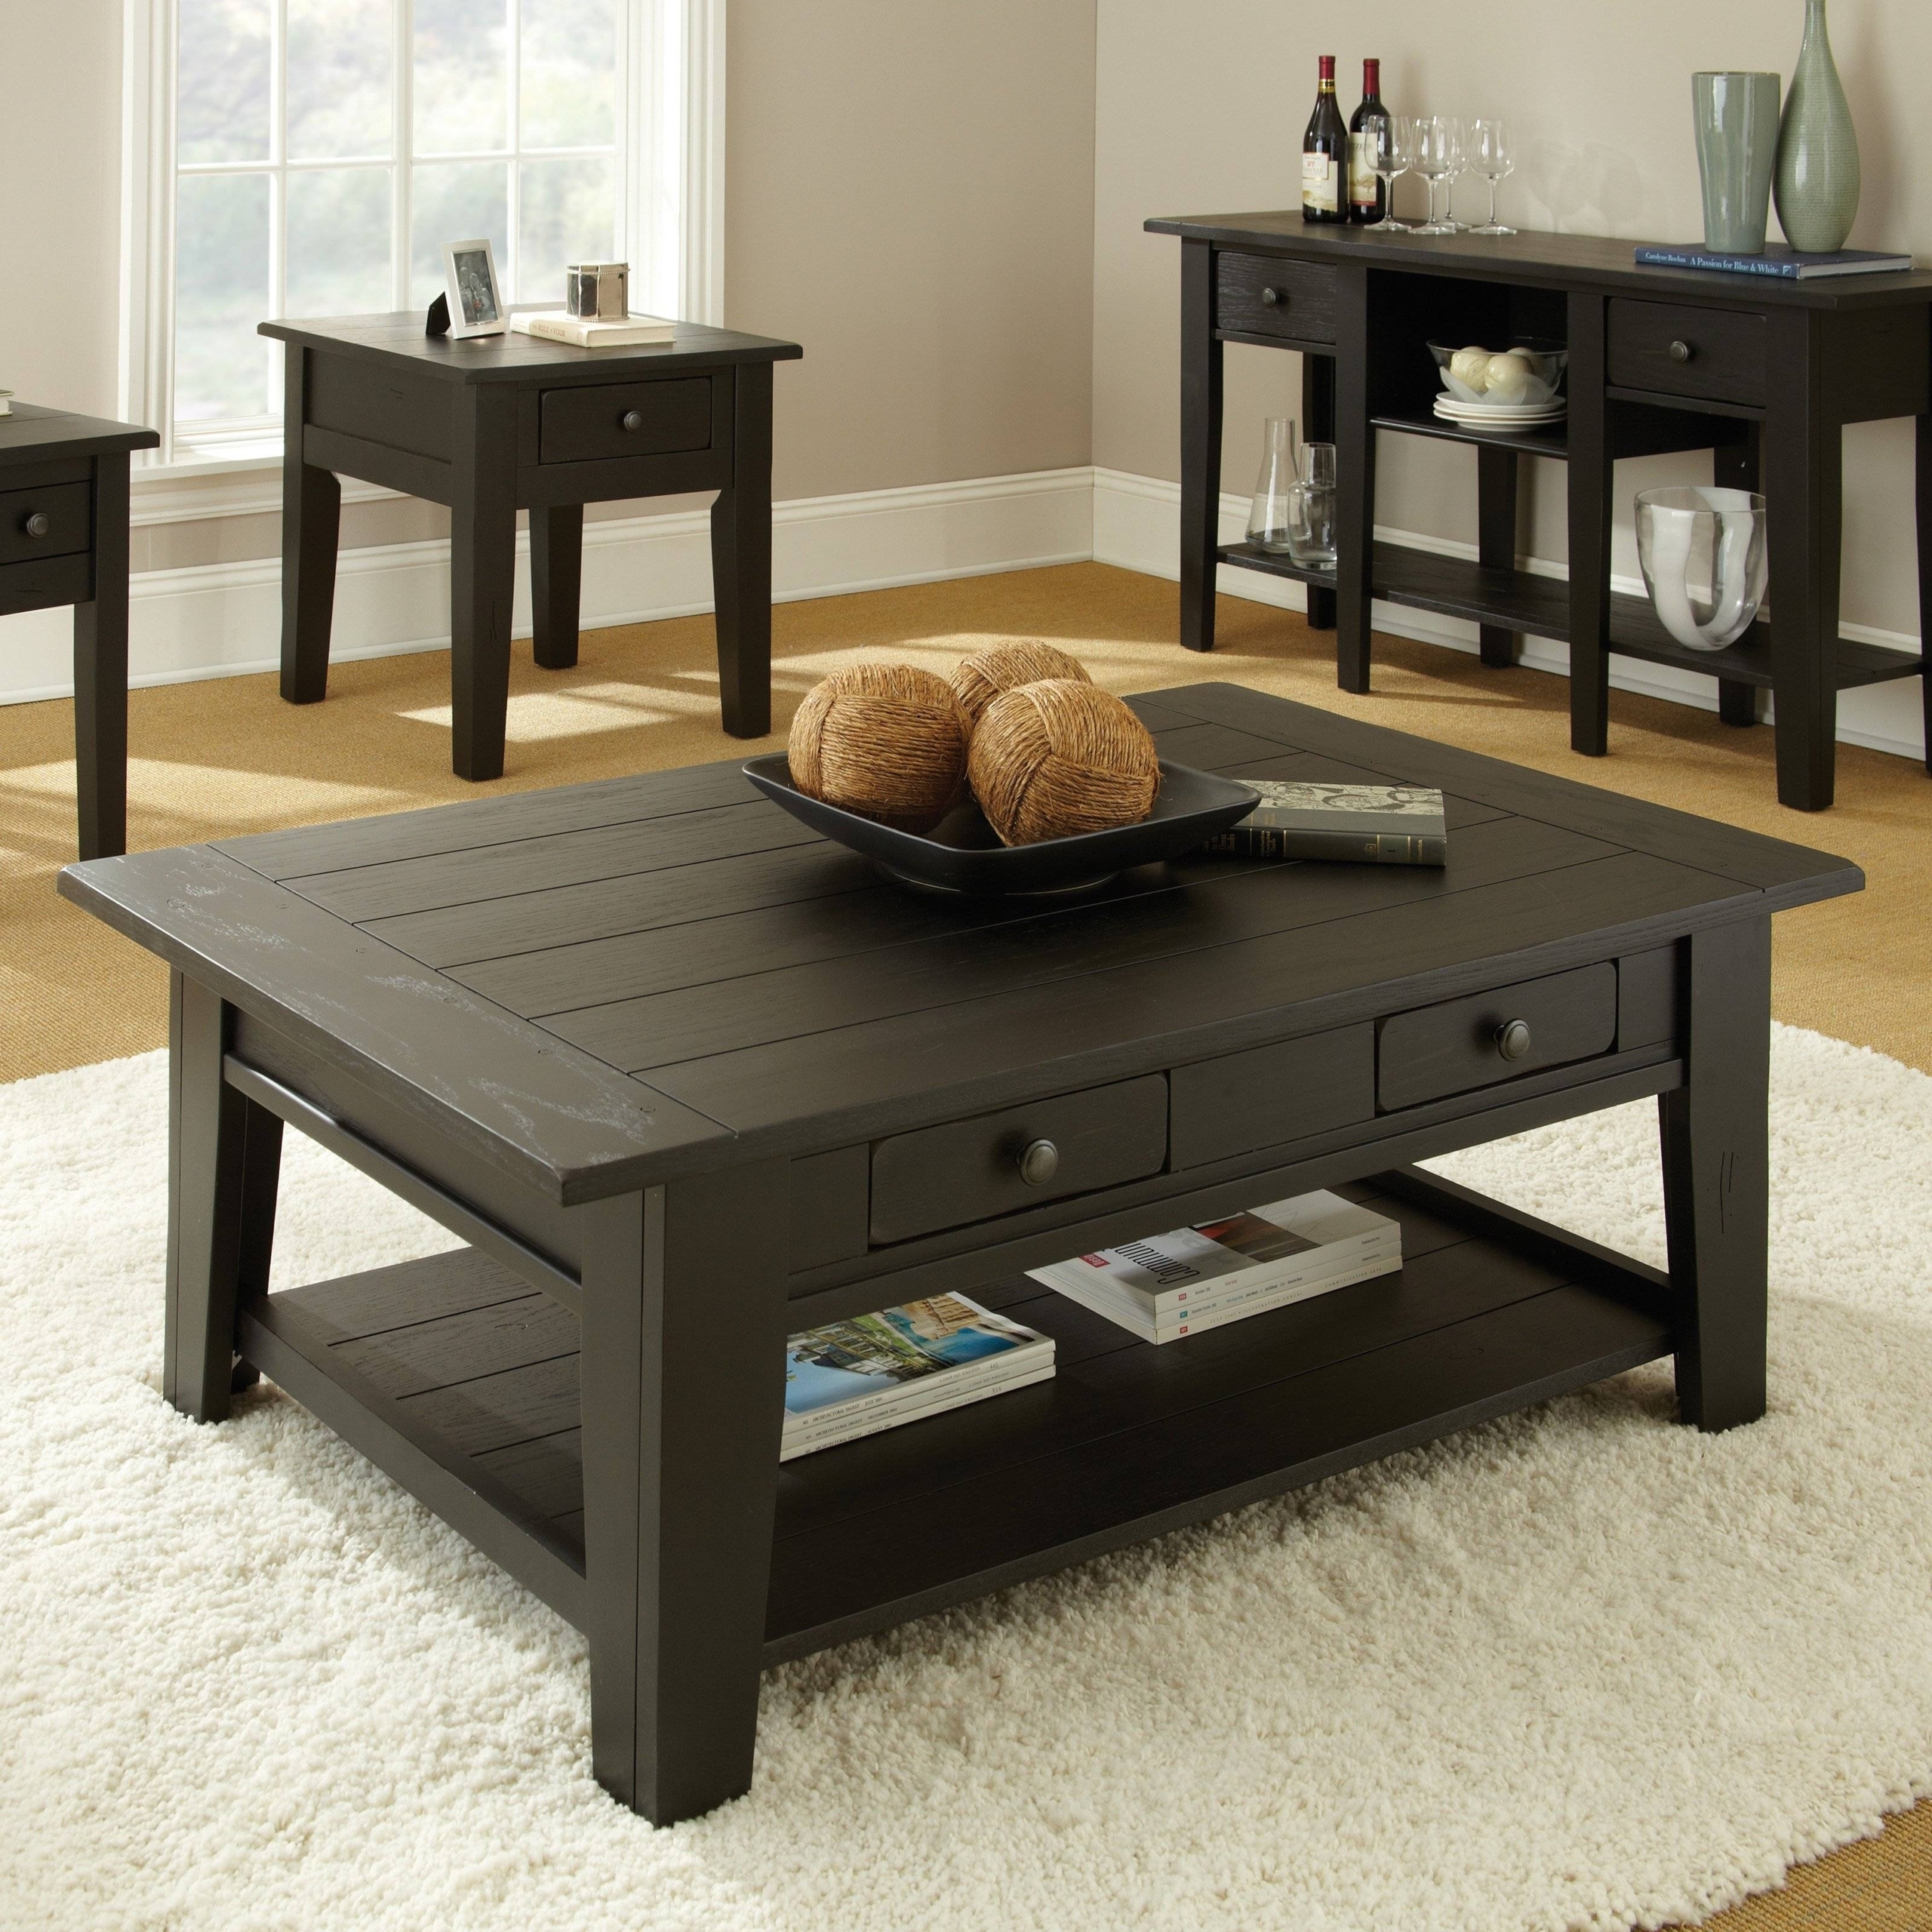 Dark Wood Square Coffee Table Ideas on Foter